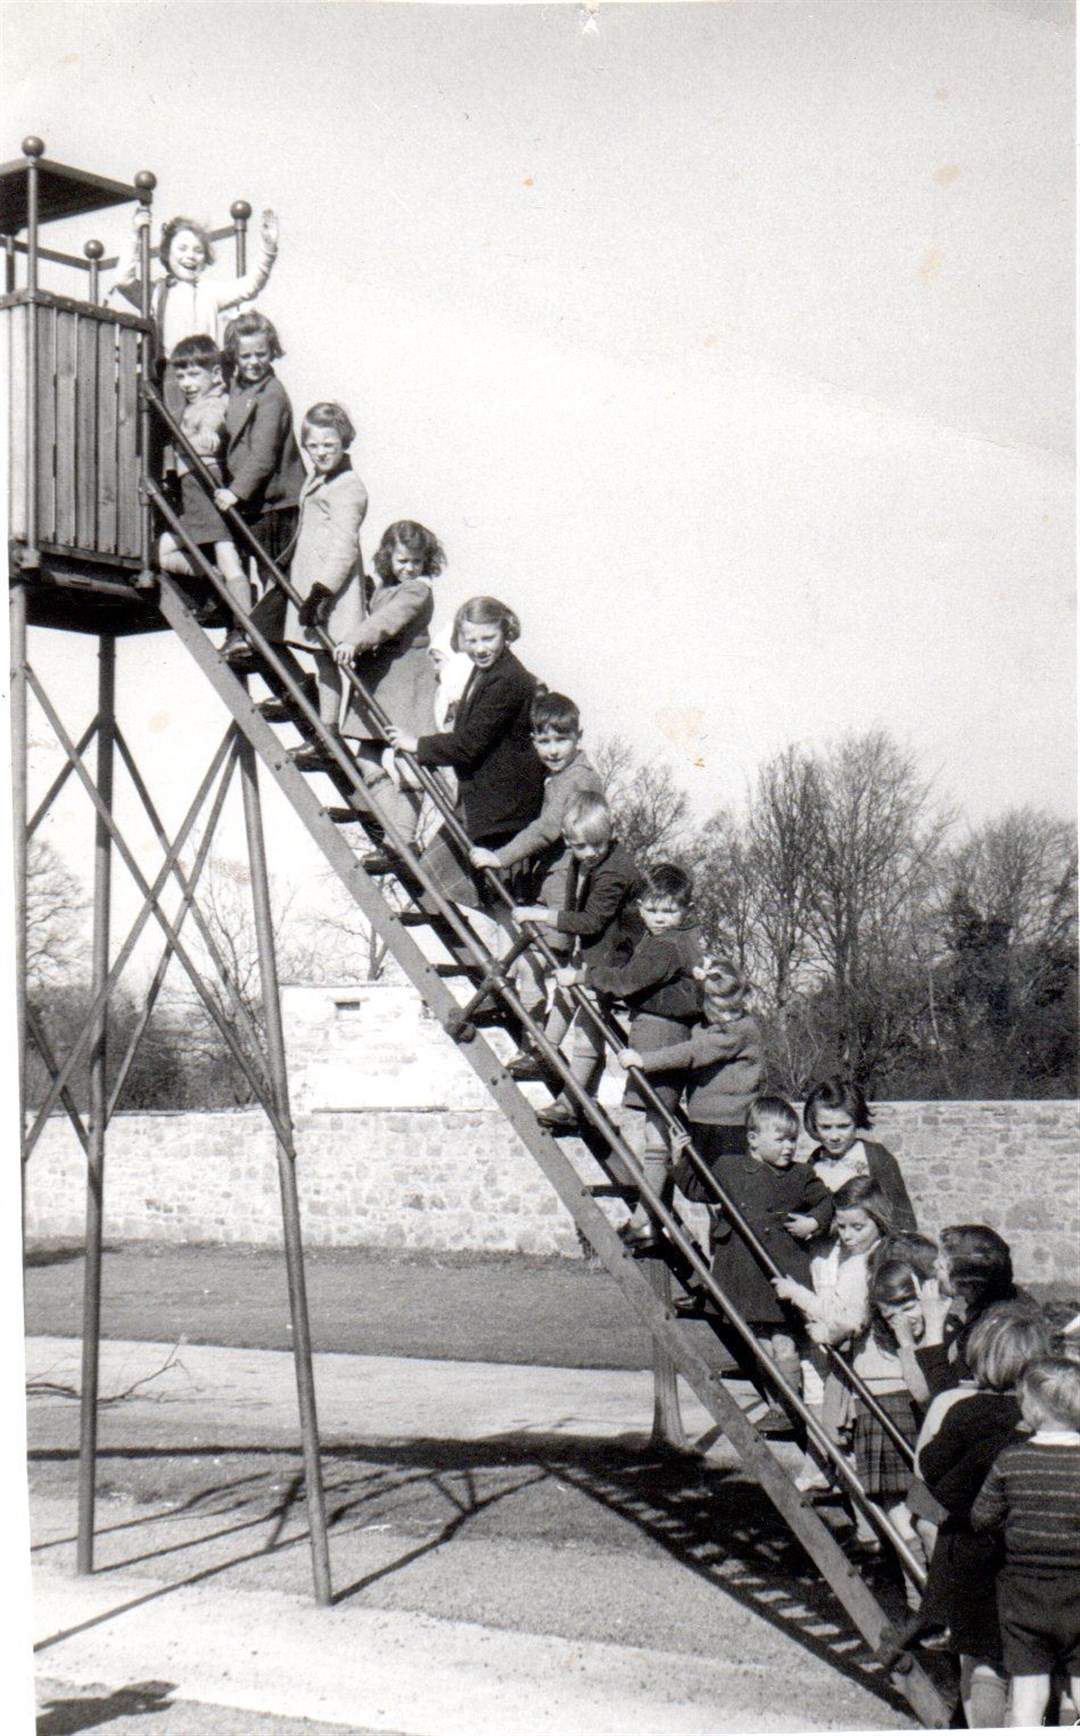 Children queue for their turn during a day at Elgin's Cooper Park in this old photograph, taken around 1955.